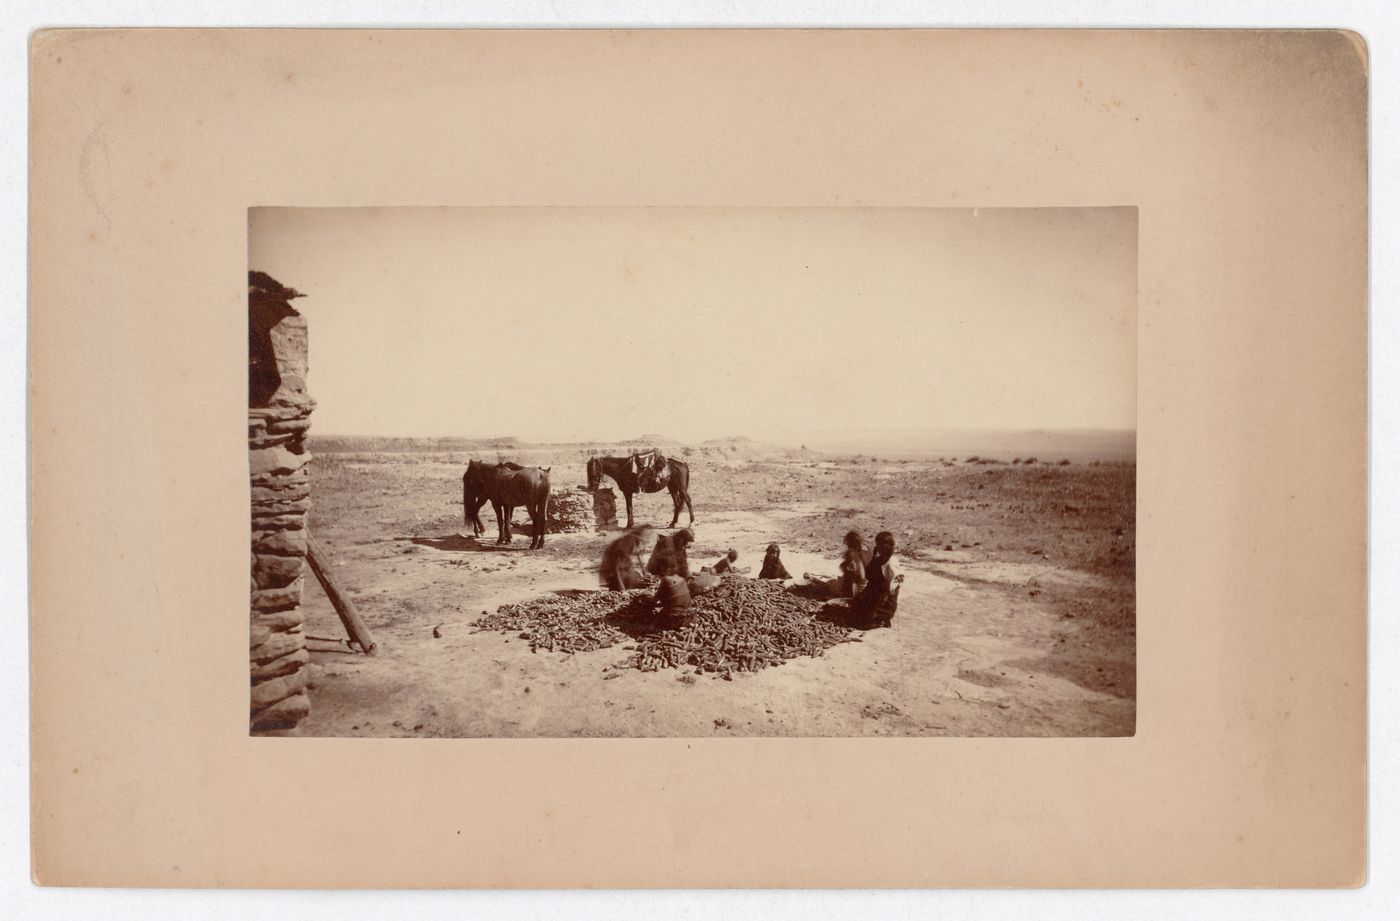 View of children and adults processing corn, with horses around a well in the background, Southwestern United States